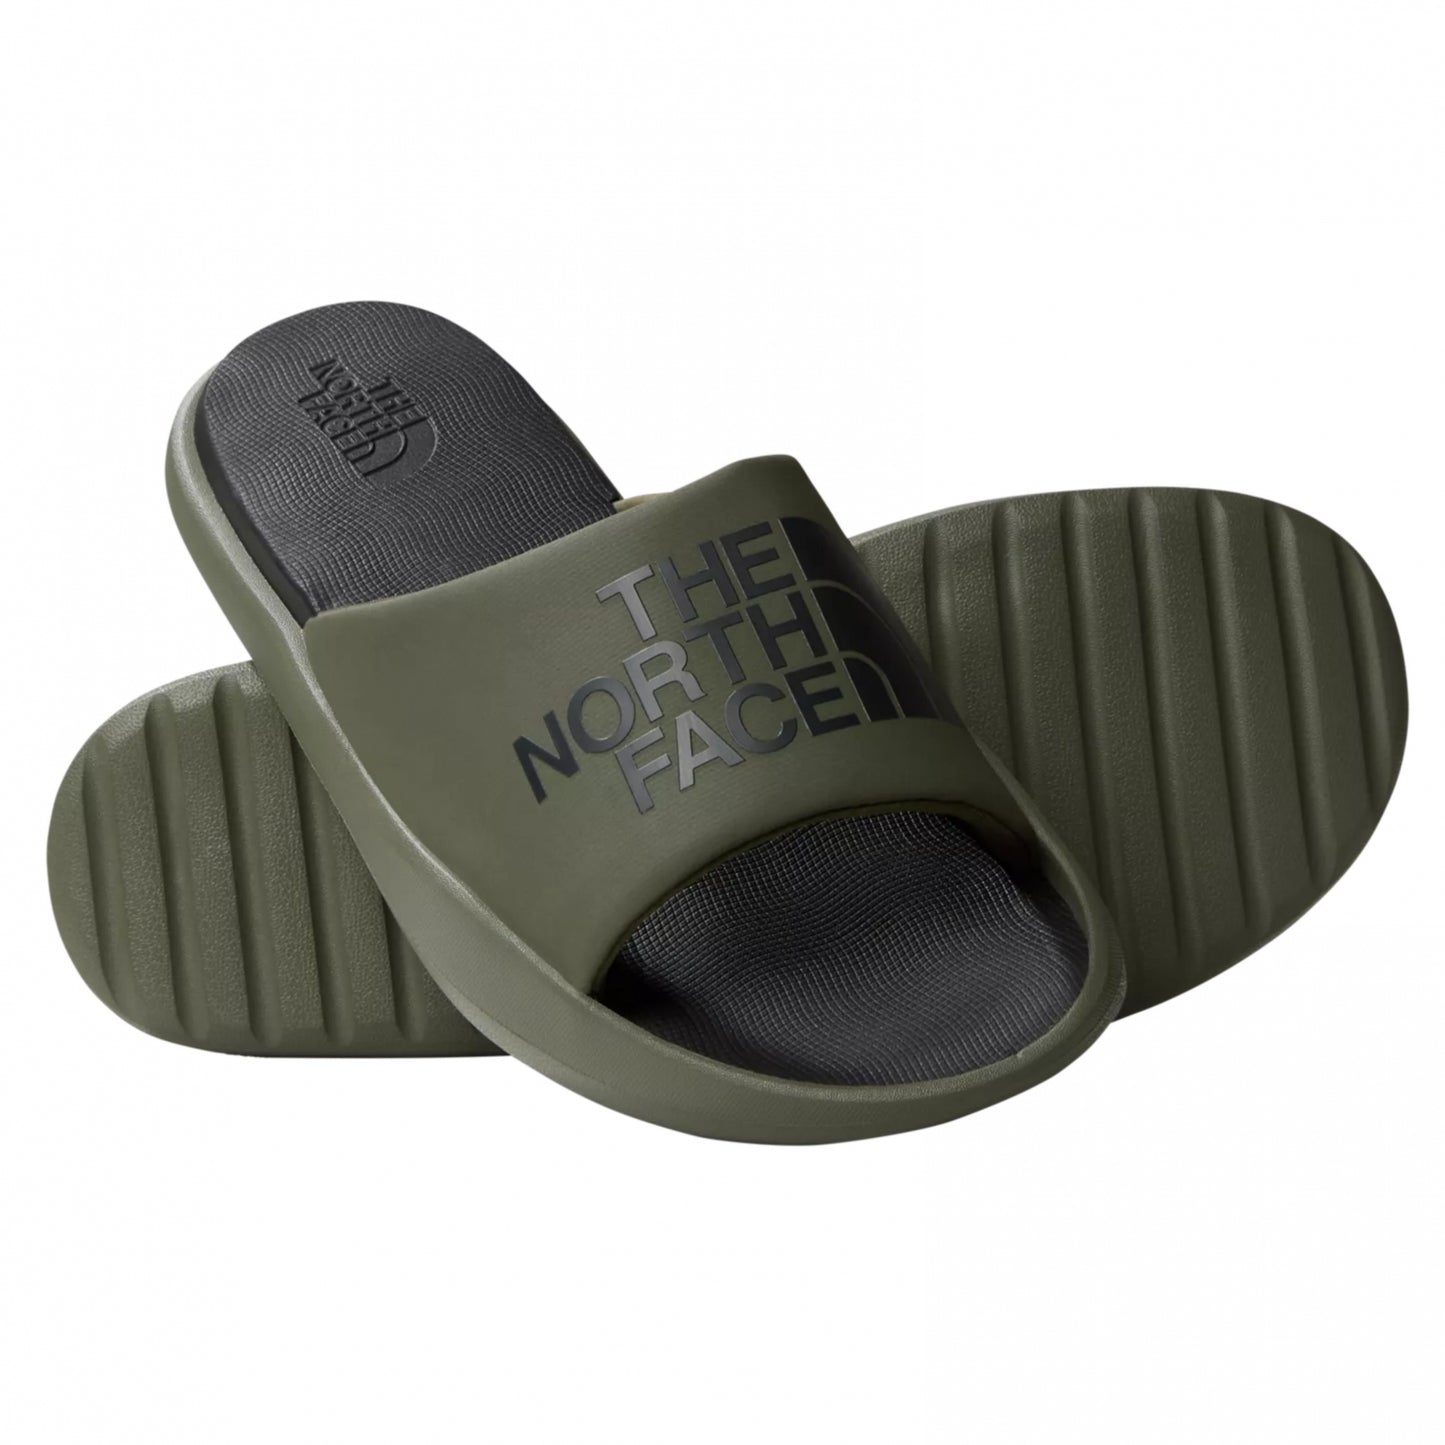 The North Face Triarch Slide GREEN slippers